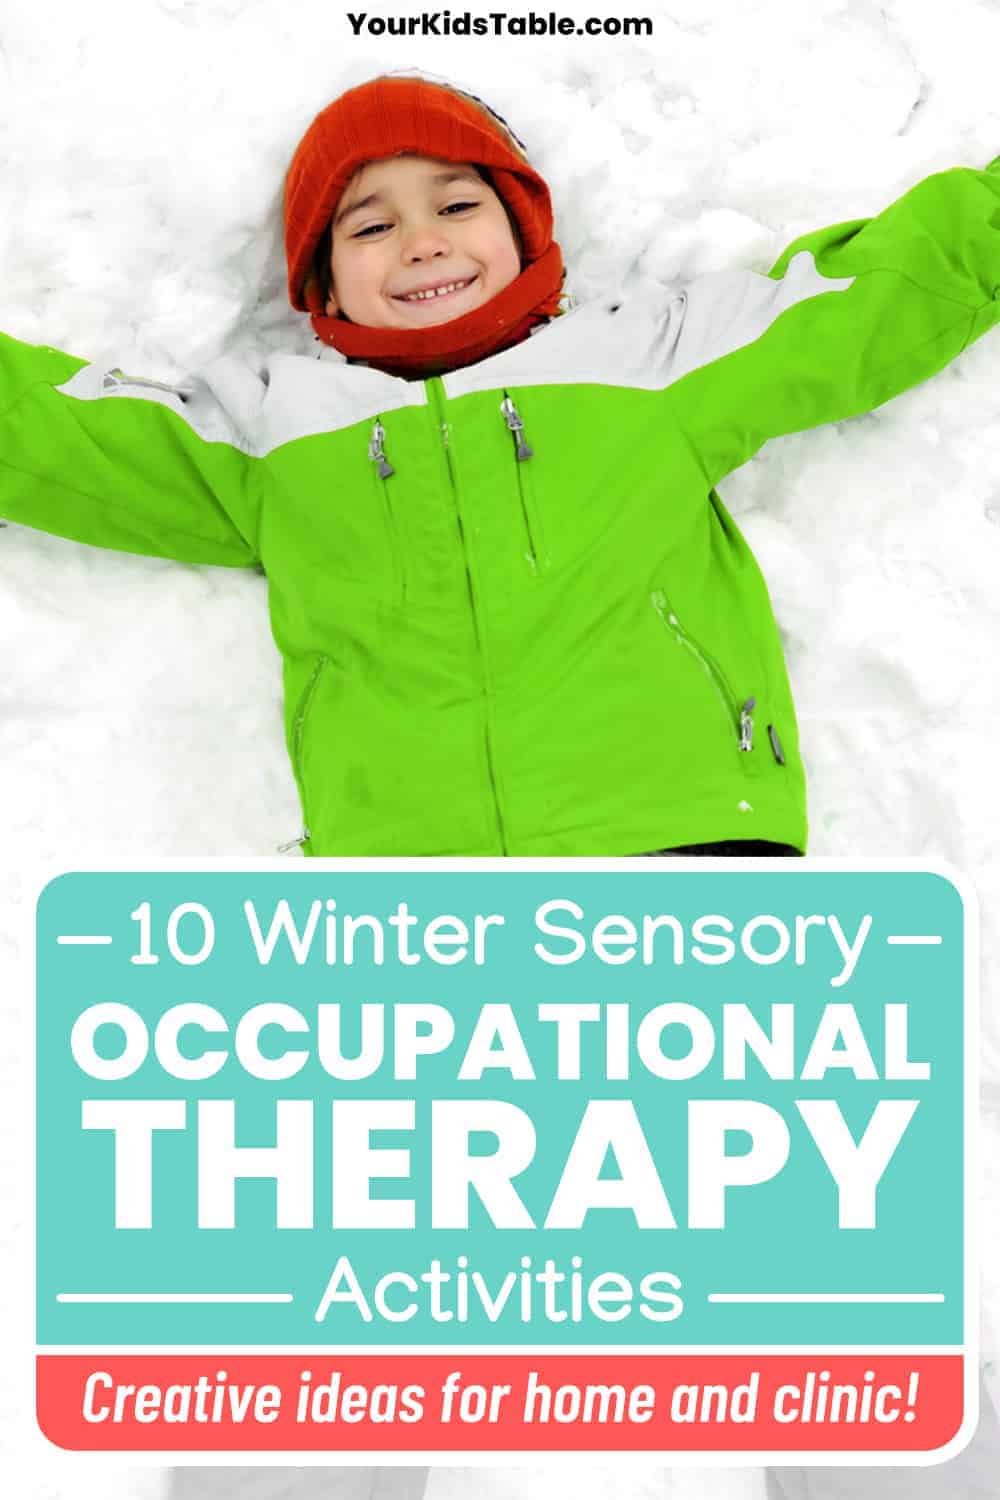 Here are 10 sensory activities for you to include in your treatment sessions and share with parents during the winter months. Learn why sensory activities and “heavy work” are important for all kids, and how to include the proprioceptive system during play.